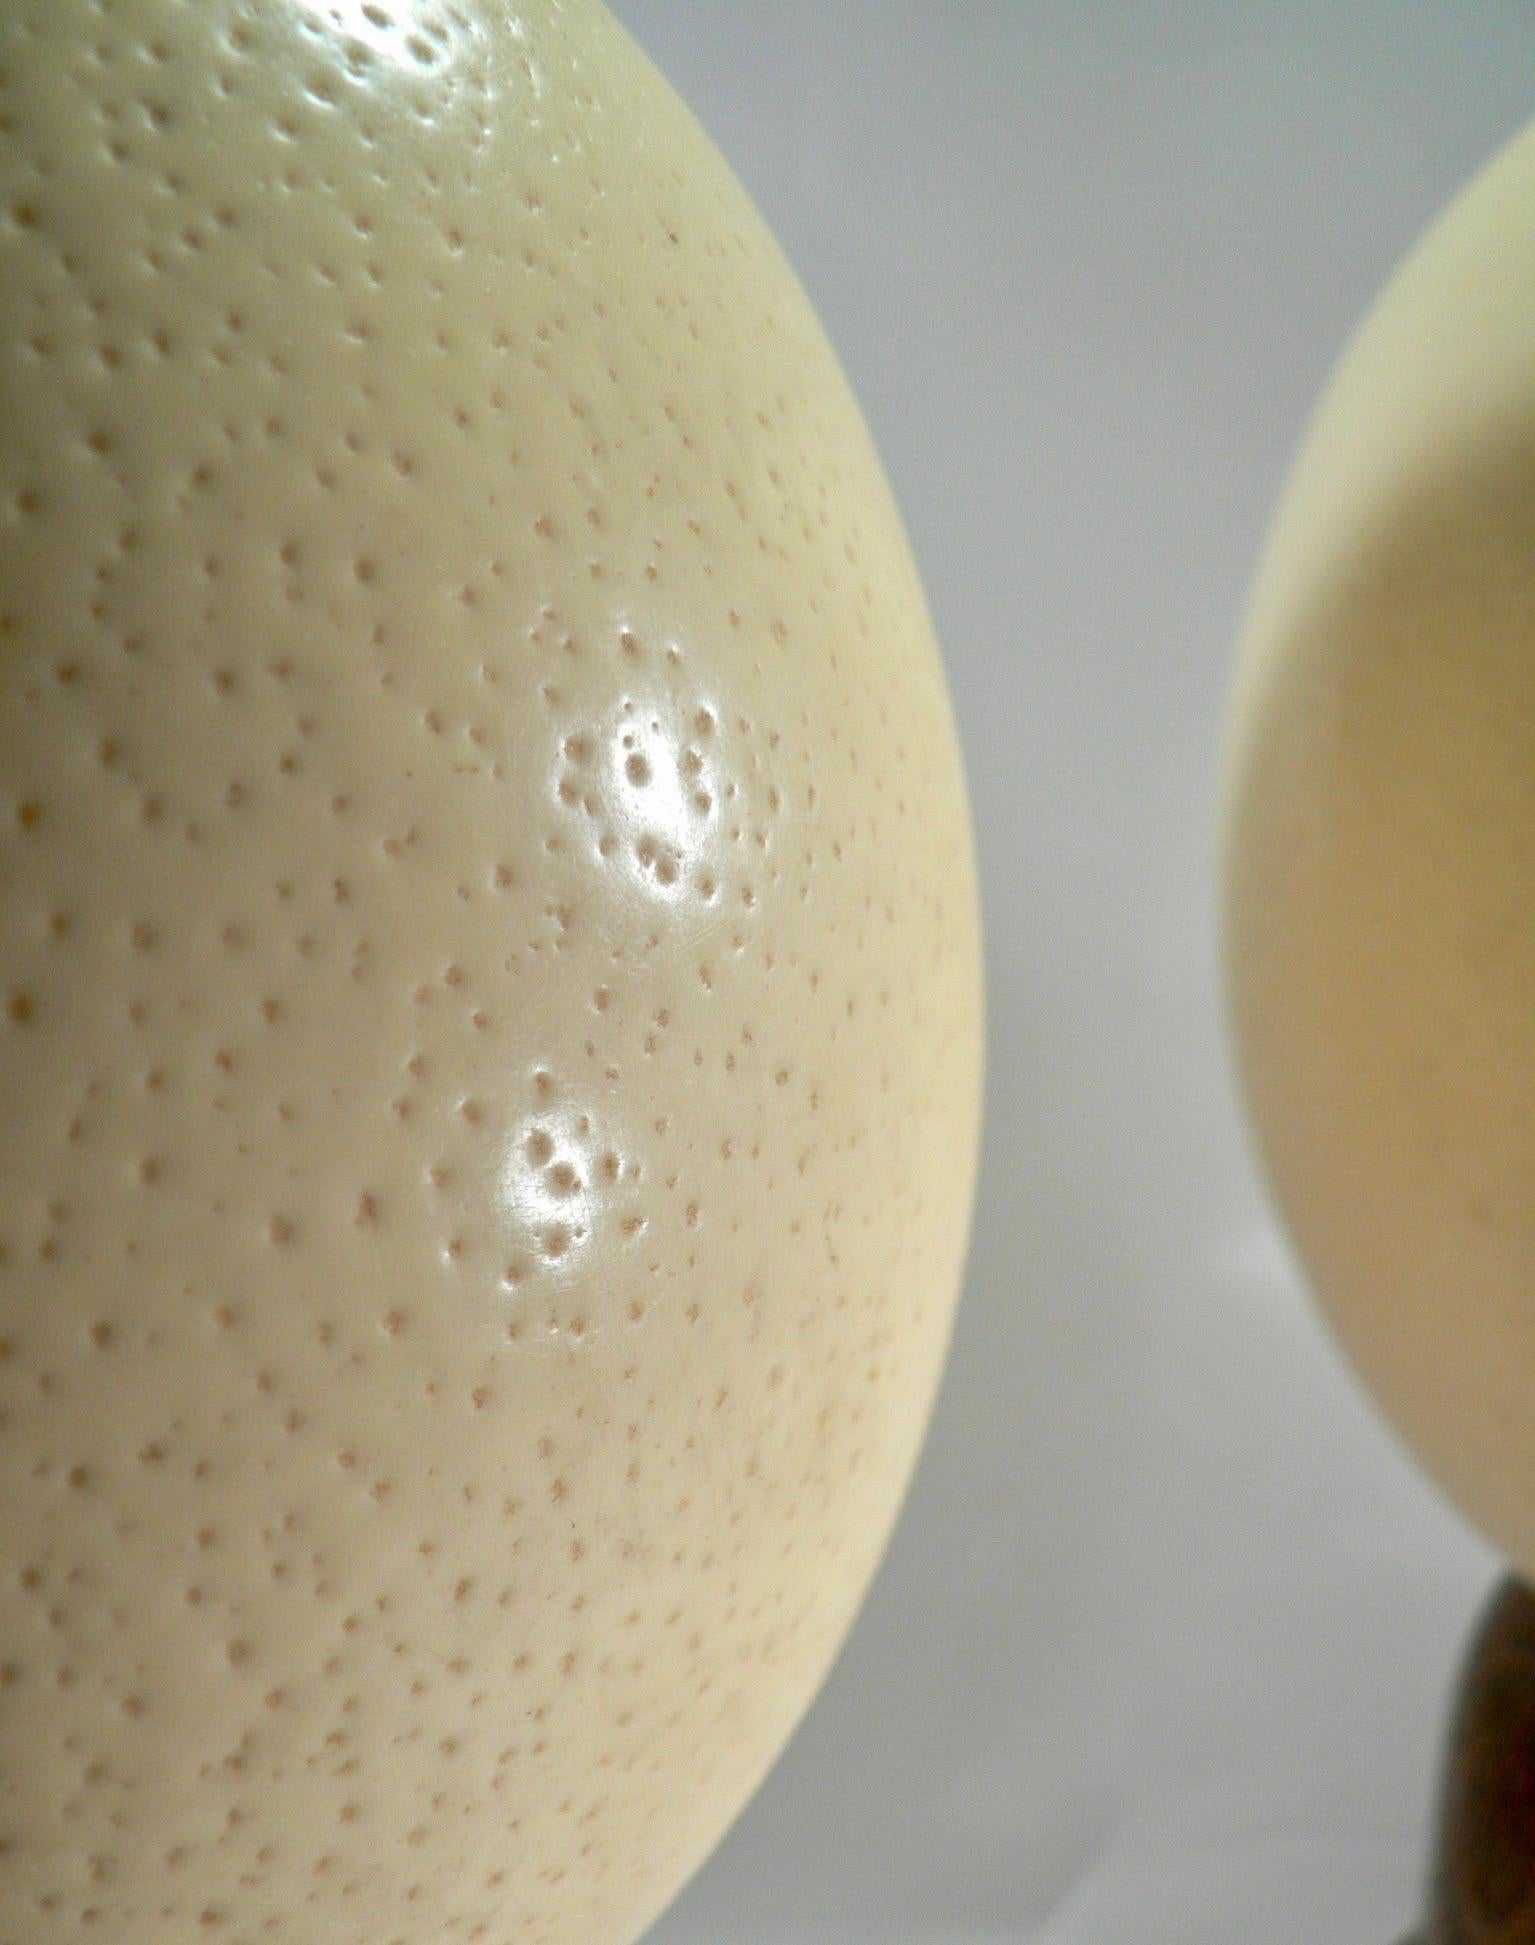 A pair of emptied ostrich eggs with their turned solid oak bases, dating back to the 19th century and originating from a cabinet of curiosities,

Ostrich eggs are particularly impressive due to their imposing size and unique texture. Their